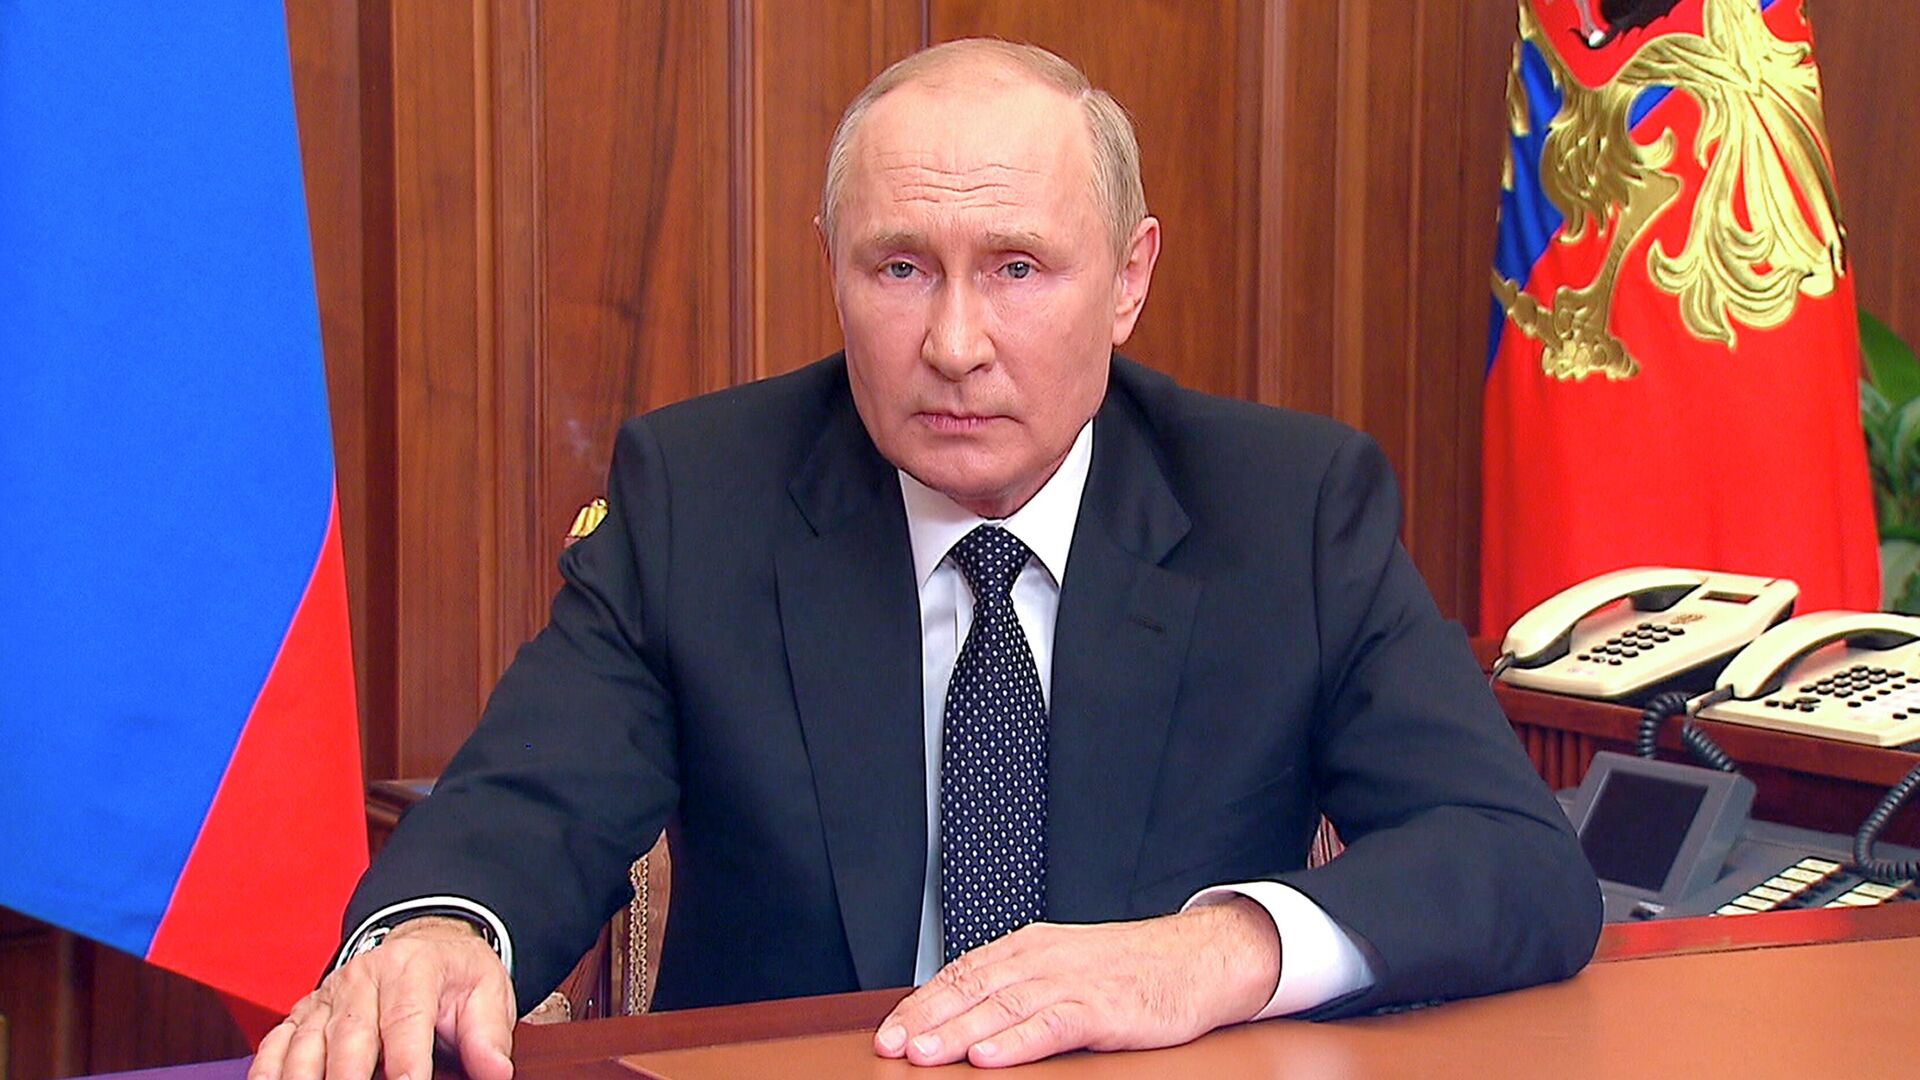 In this image released by the Russian Presidential Press Service, Russian President Vladimir Putin addresses the nation in Moscow, Russia, Wednesday, Sept. 21, 2022 - Sputnik International, 1920, 21.09.2022